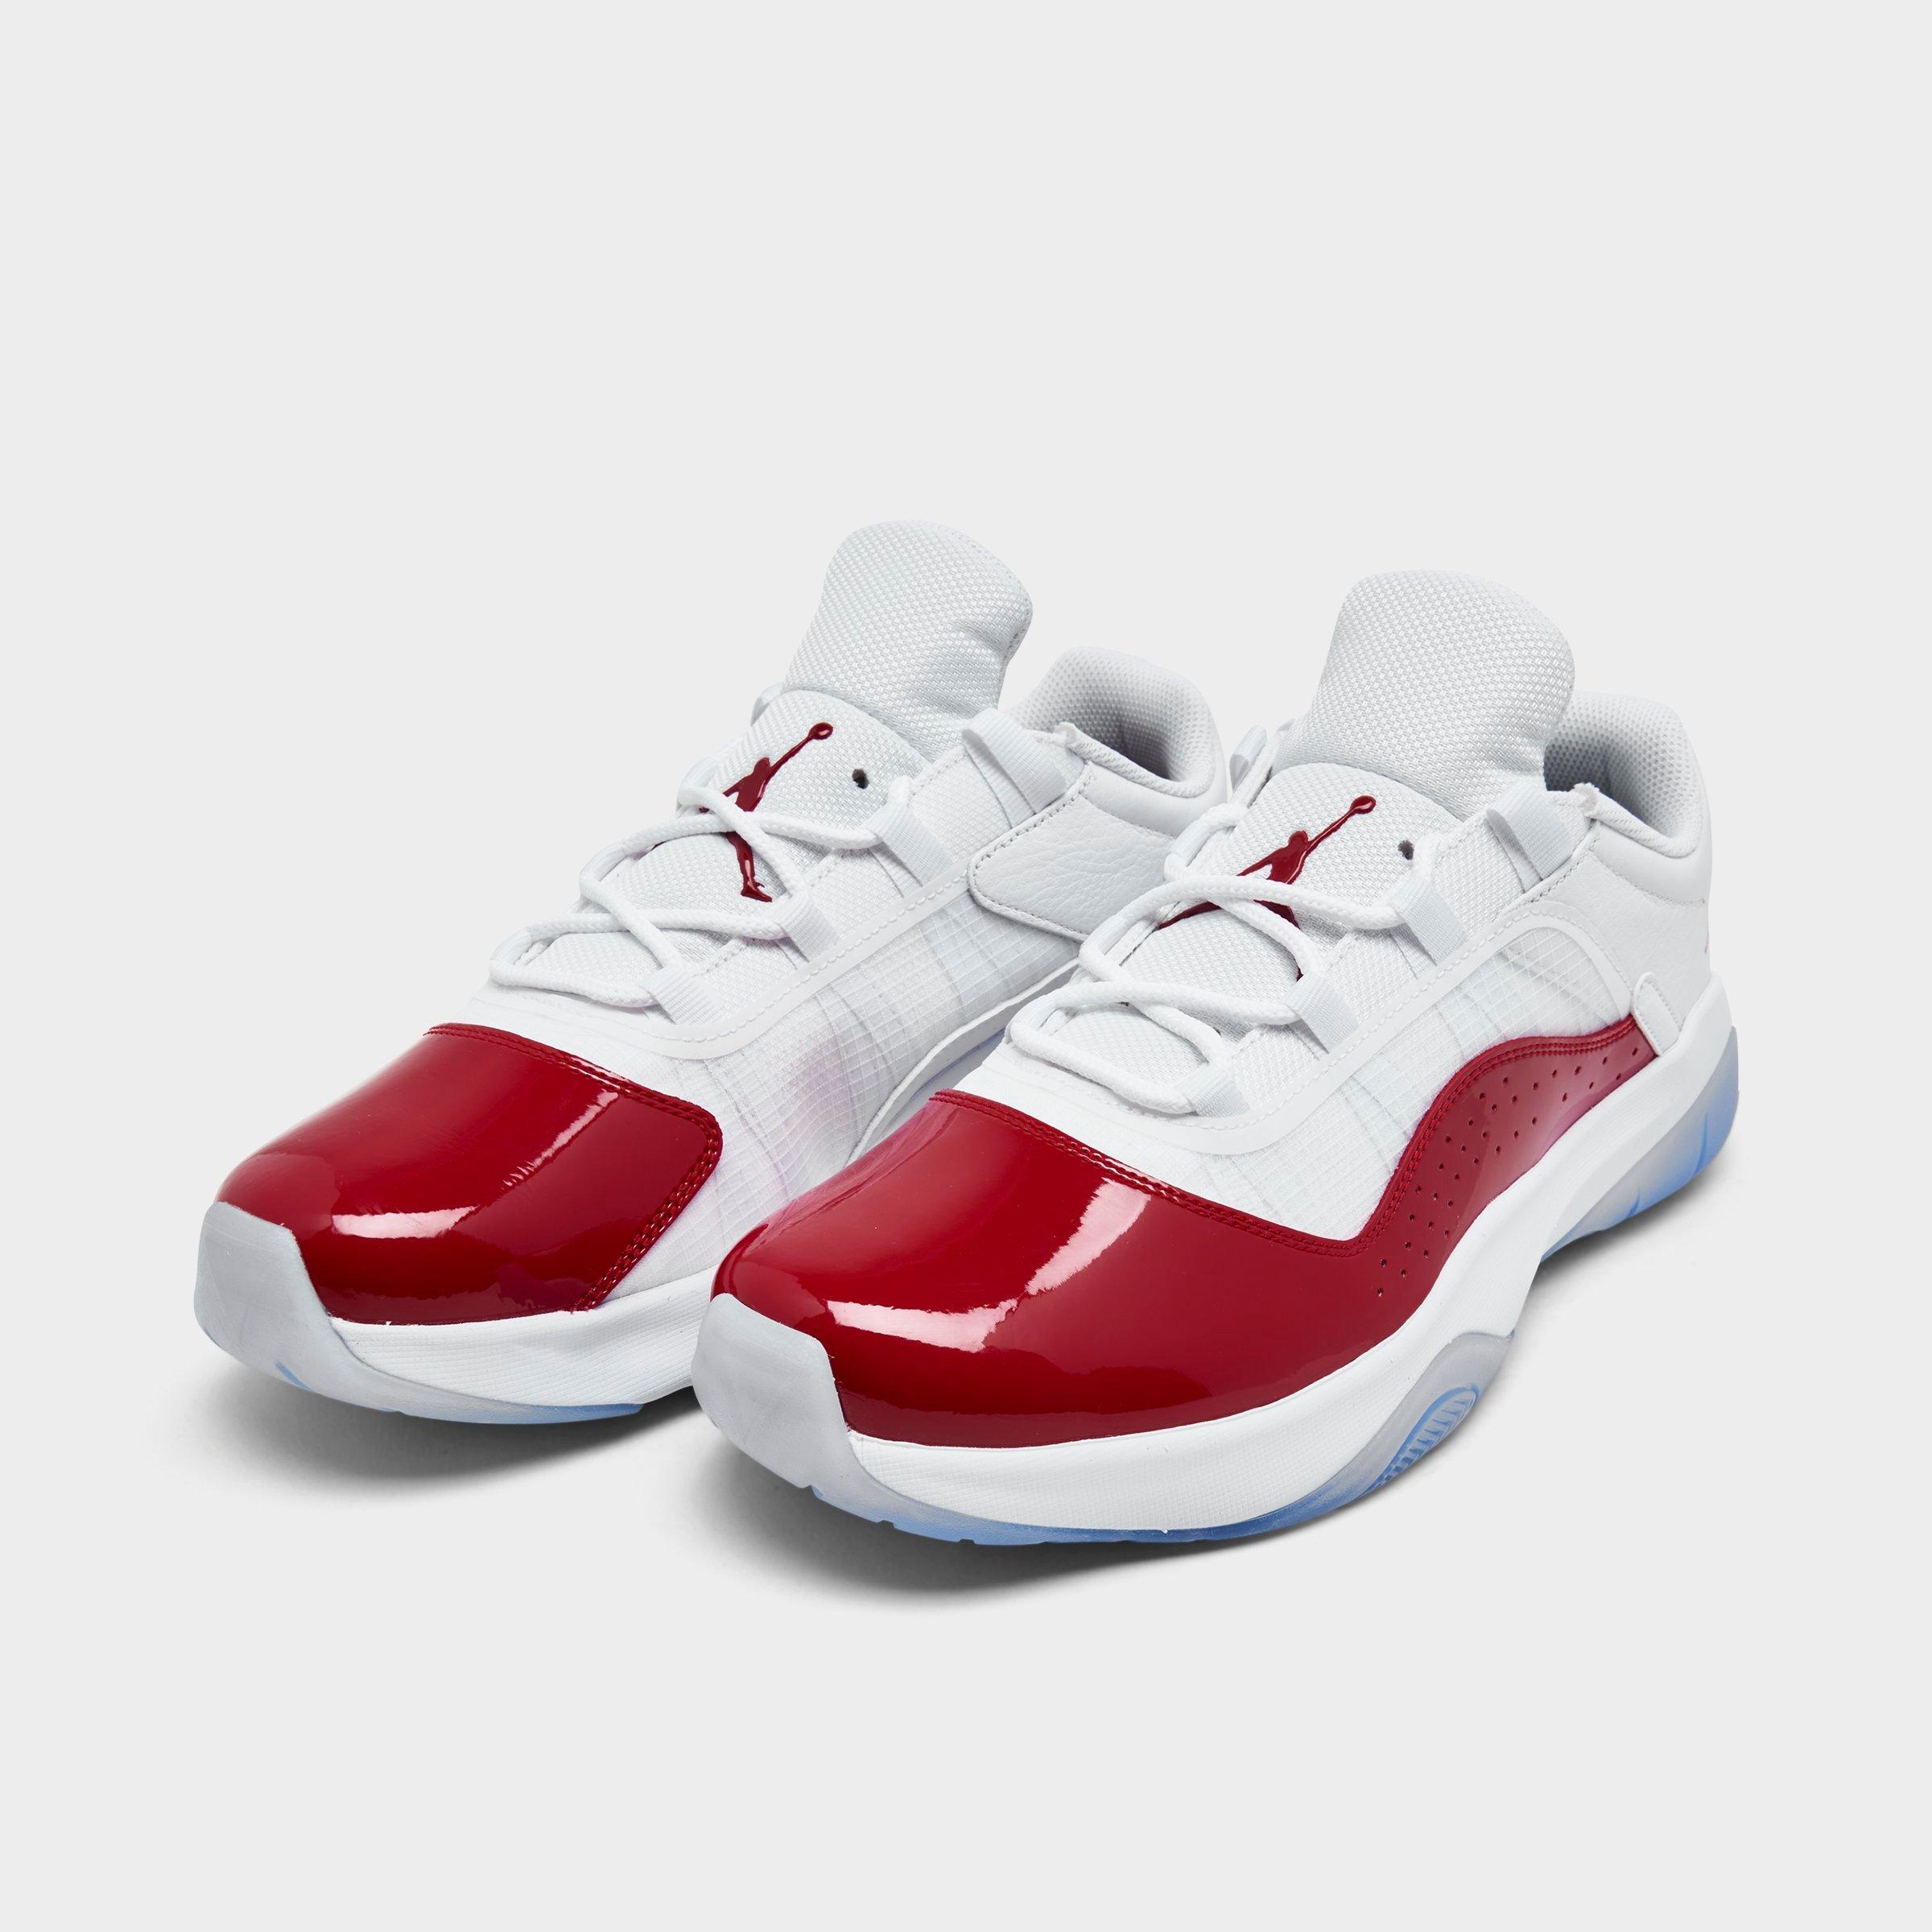 red and white jordan 11